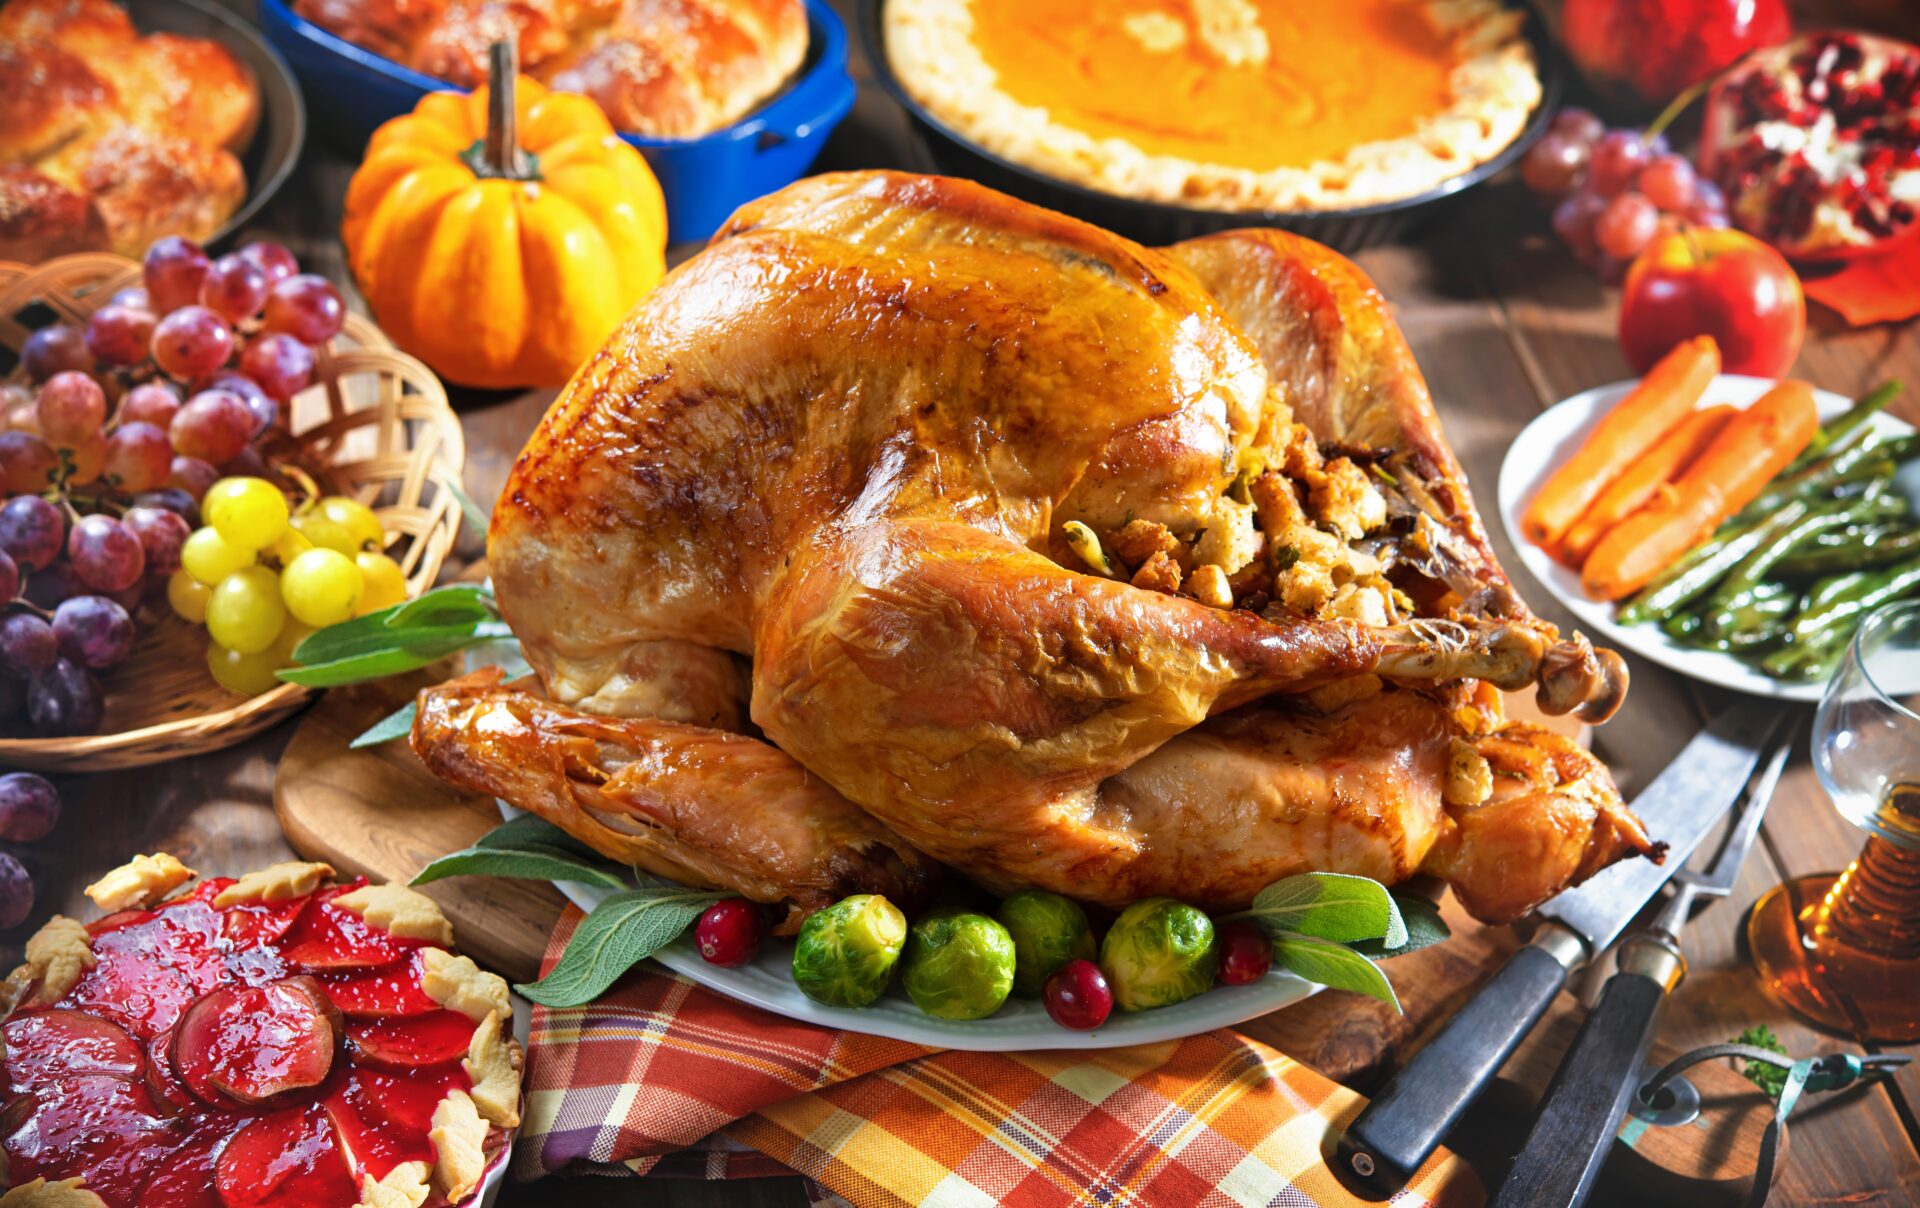 Home For The Holidays: Will It Be Better To Buy At Thanksgiving Or Christmas?